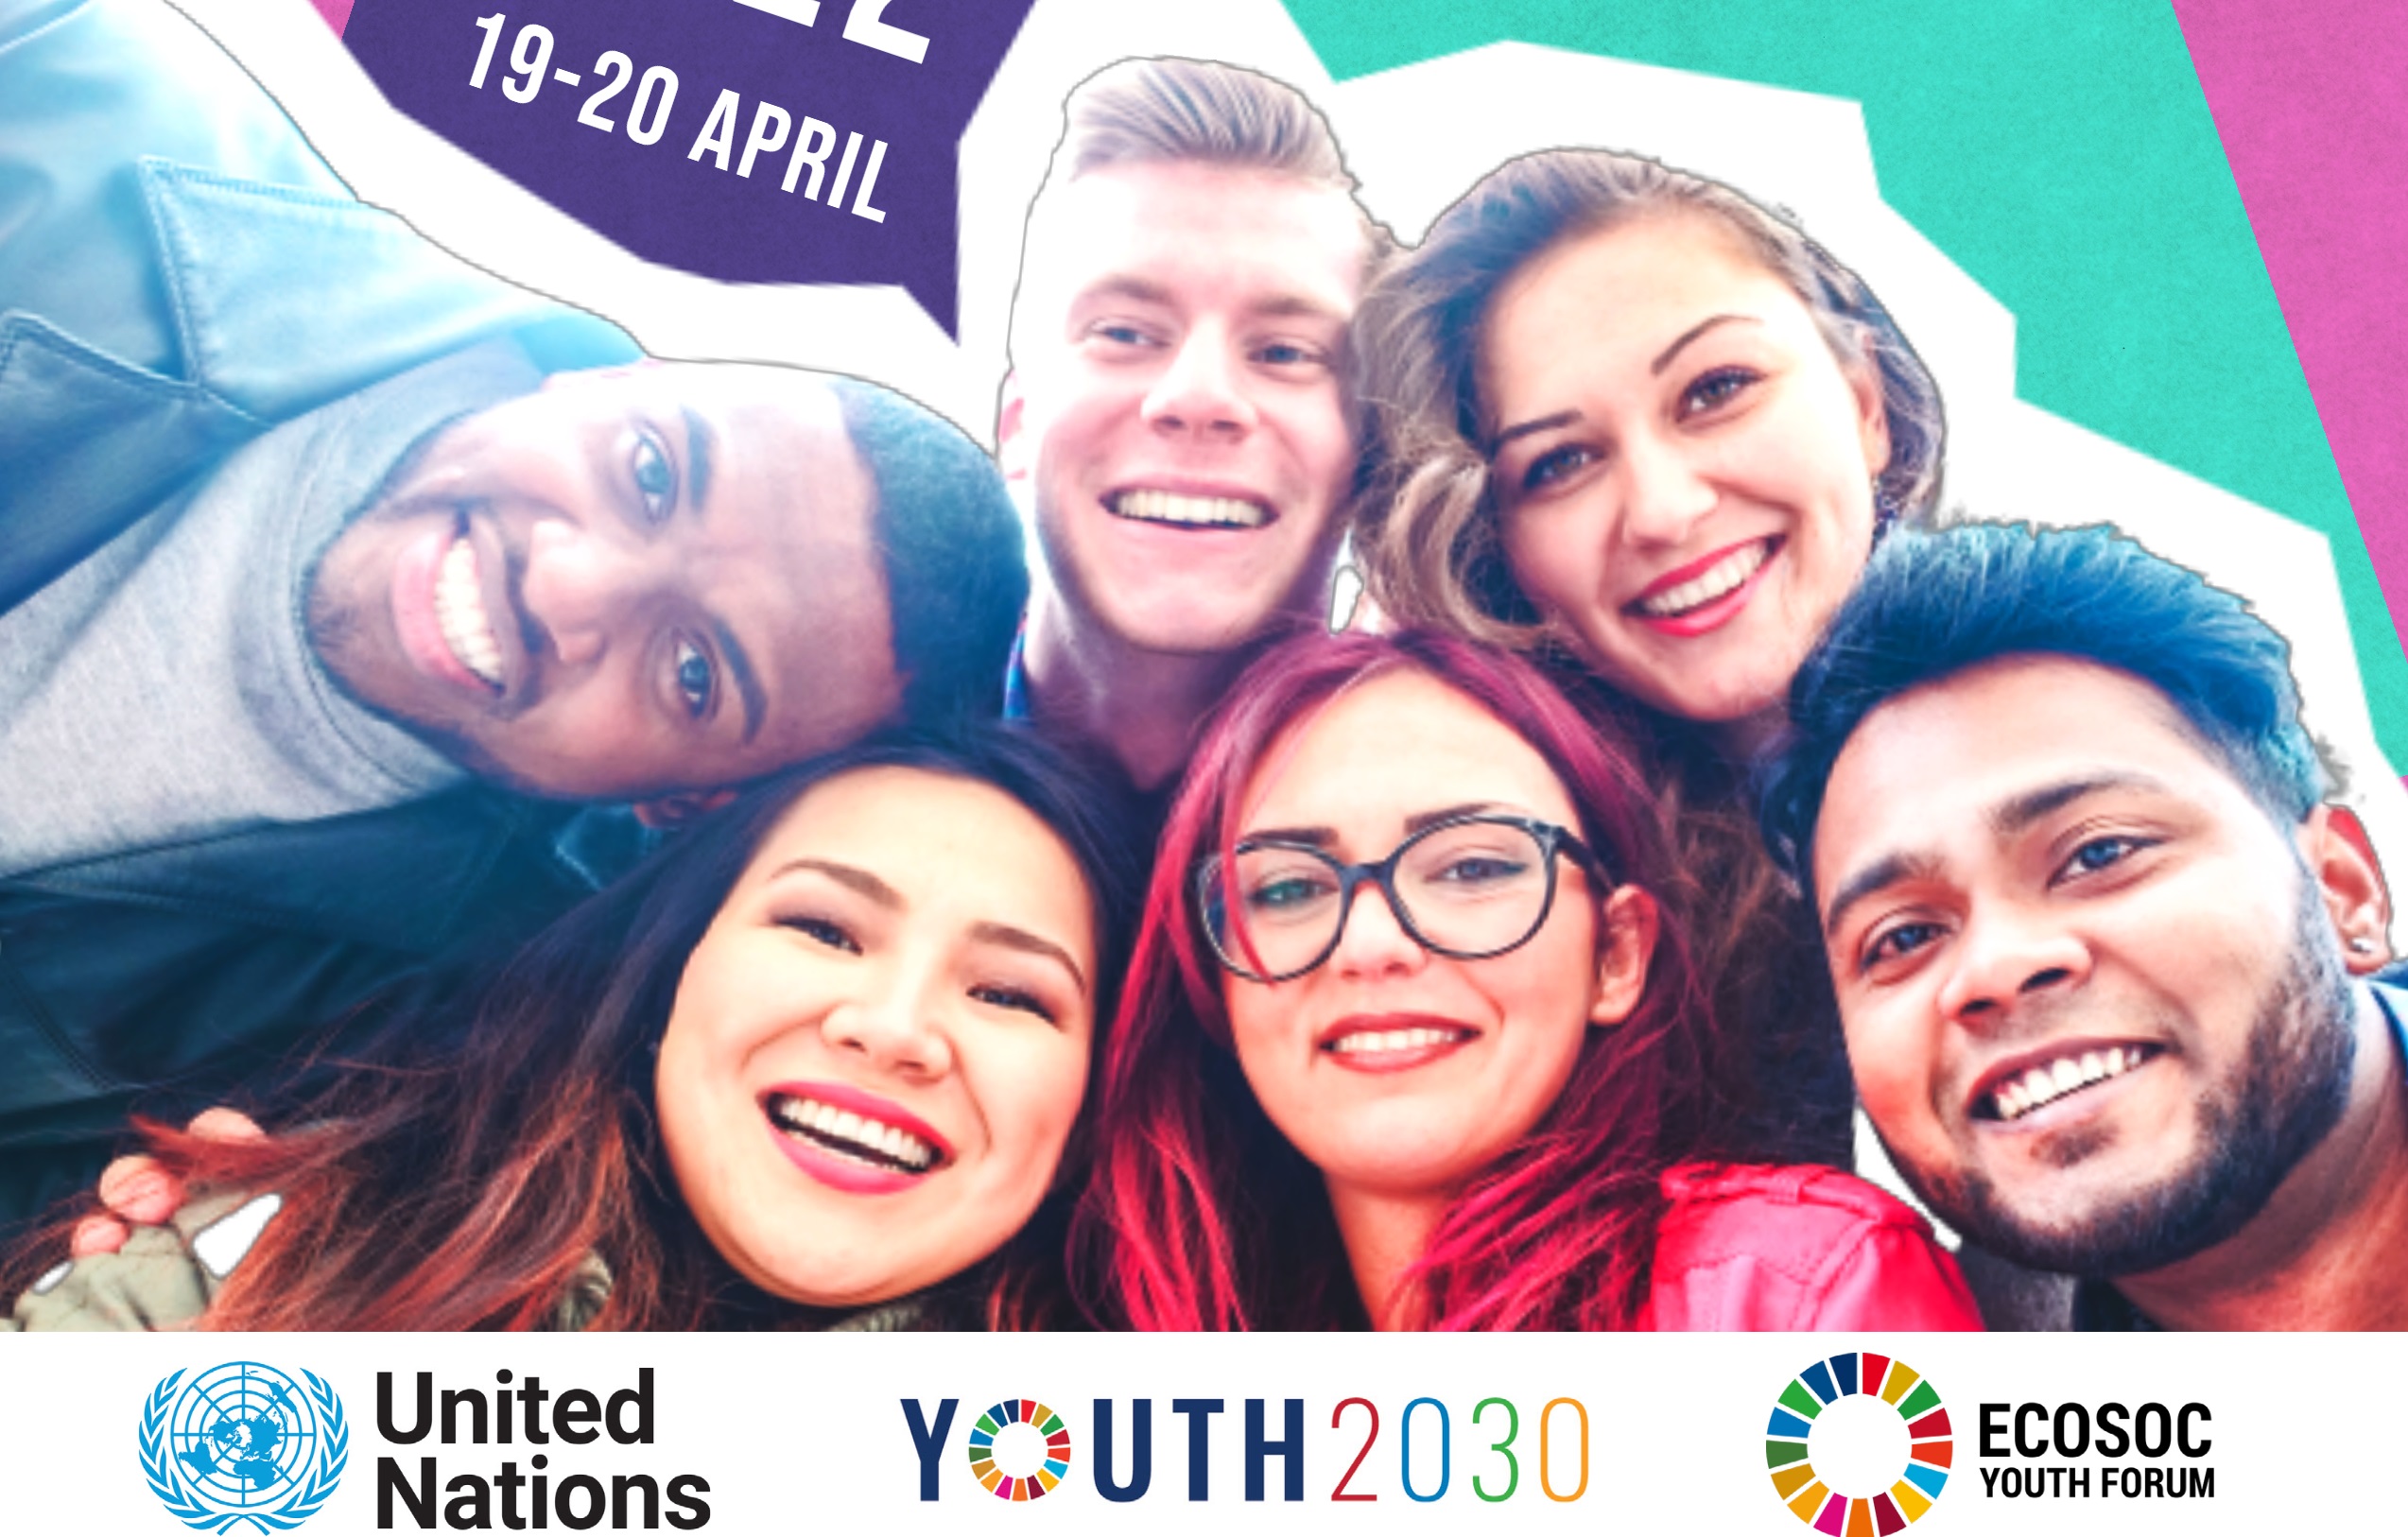 Youth gathering together - financing - sustainable development